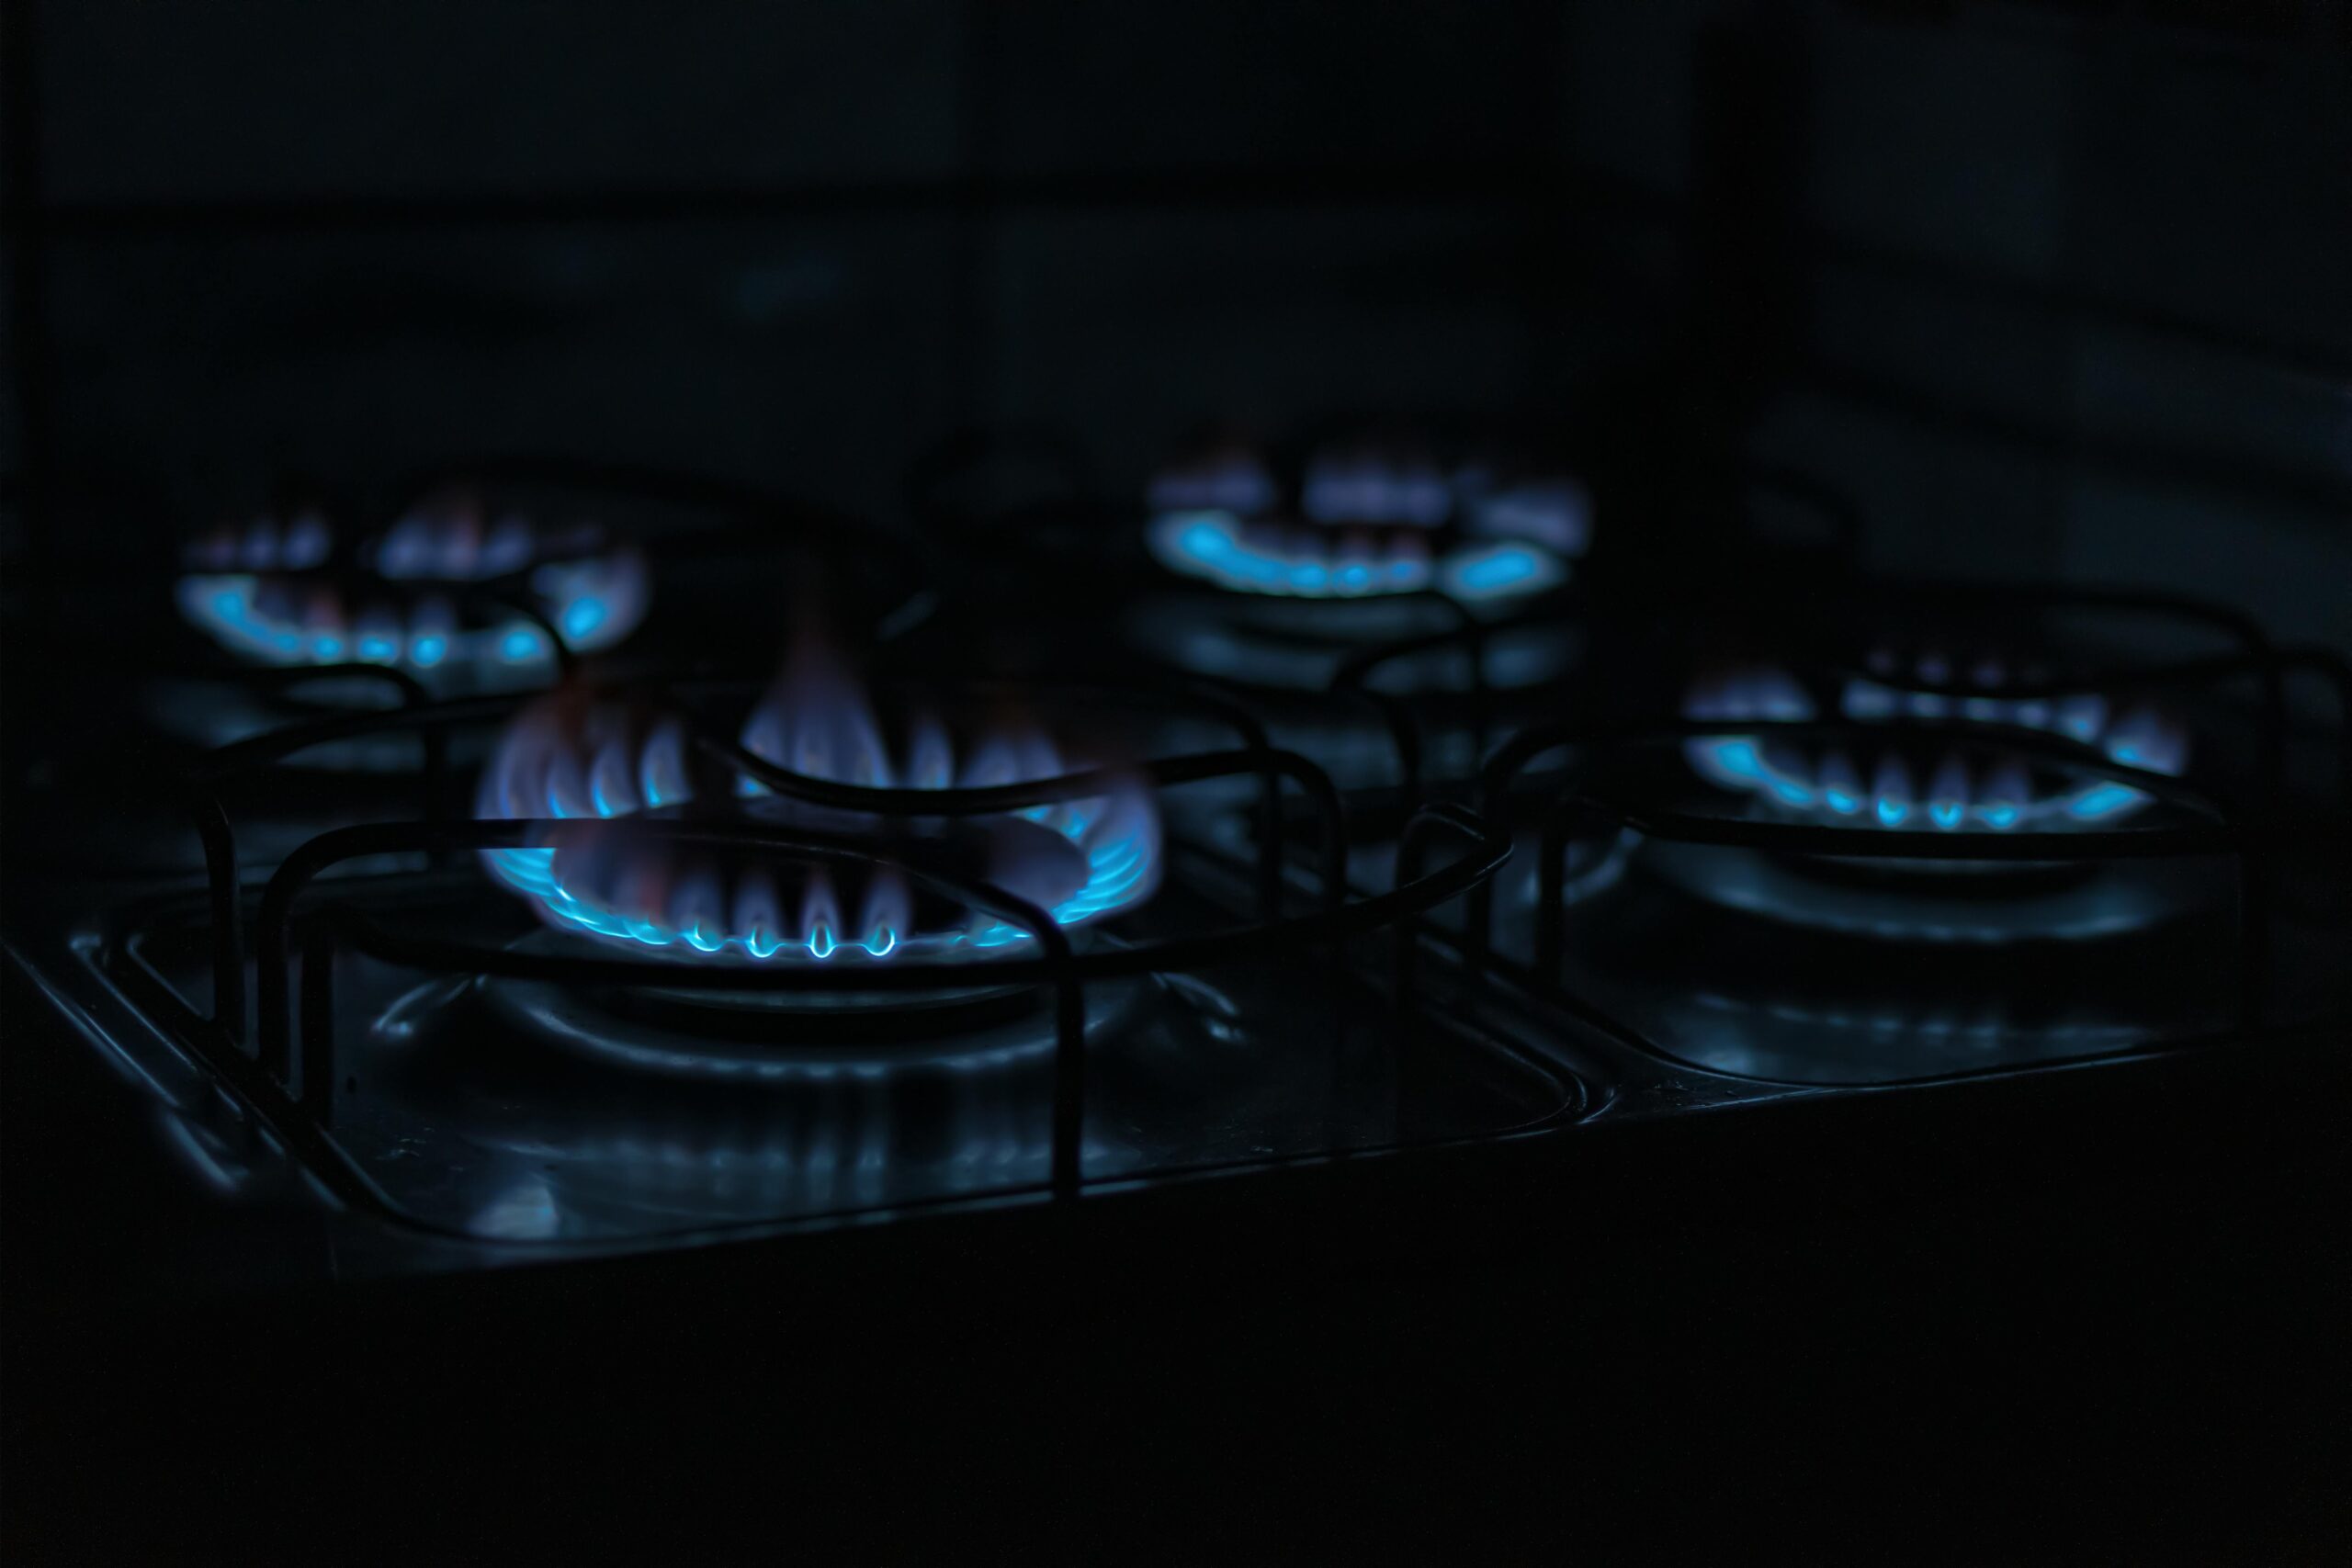 Four lit gas burners on a stove top.